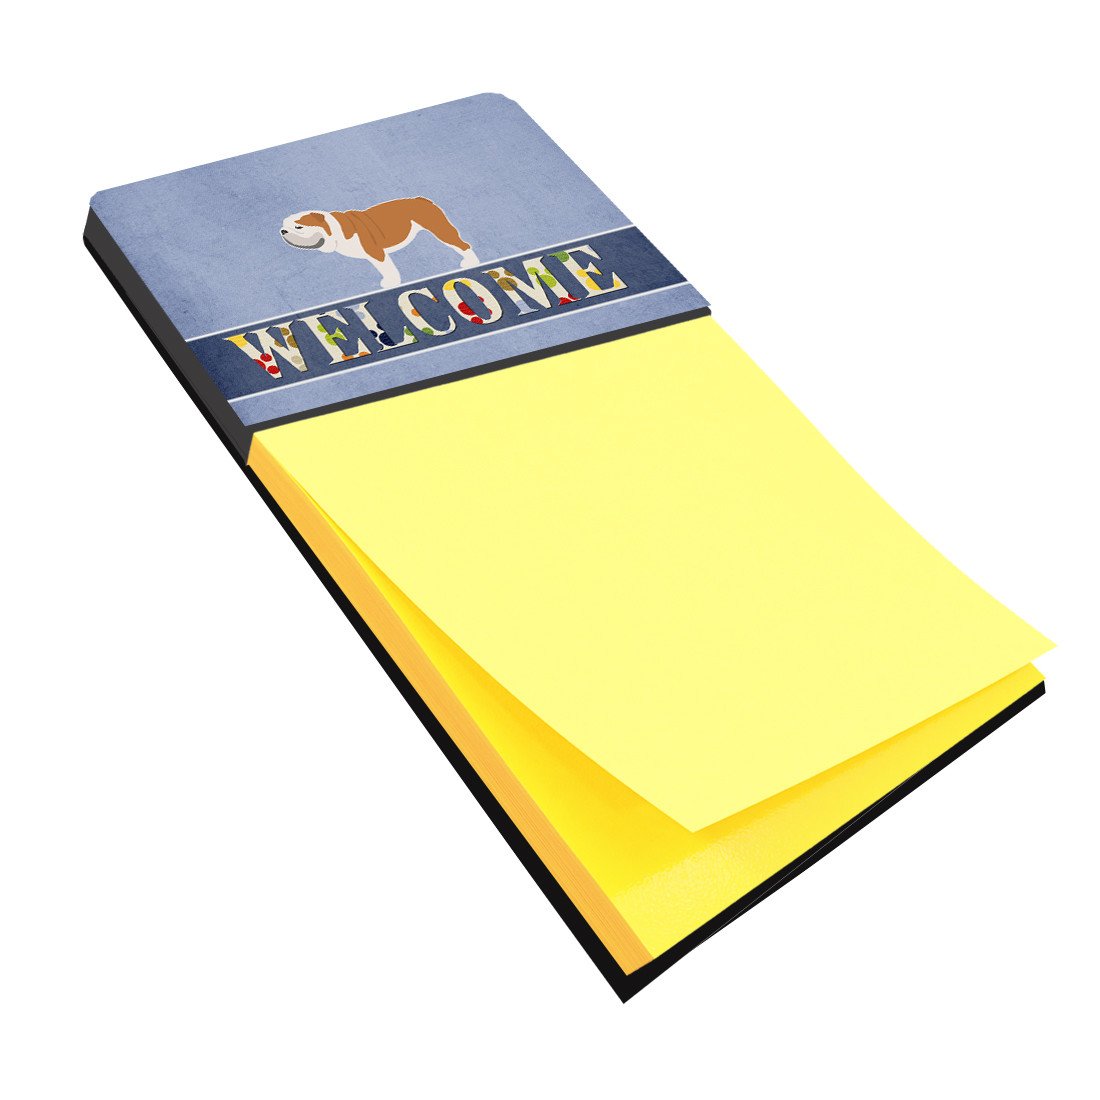 English Bulldog Welcome Sticky Note Holder BB5566SN by Caroline's Treasures